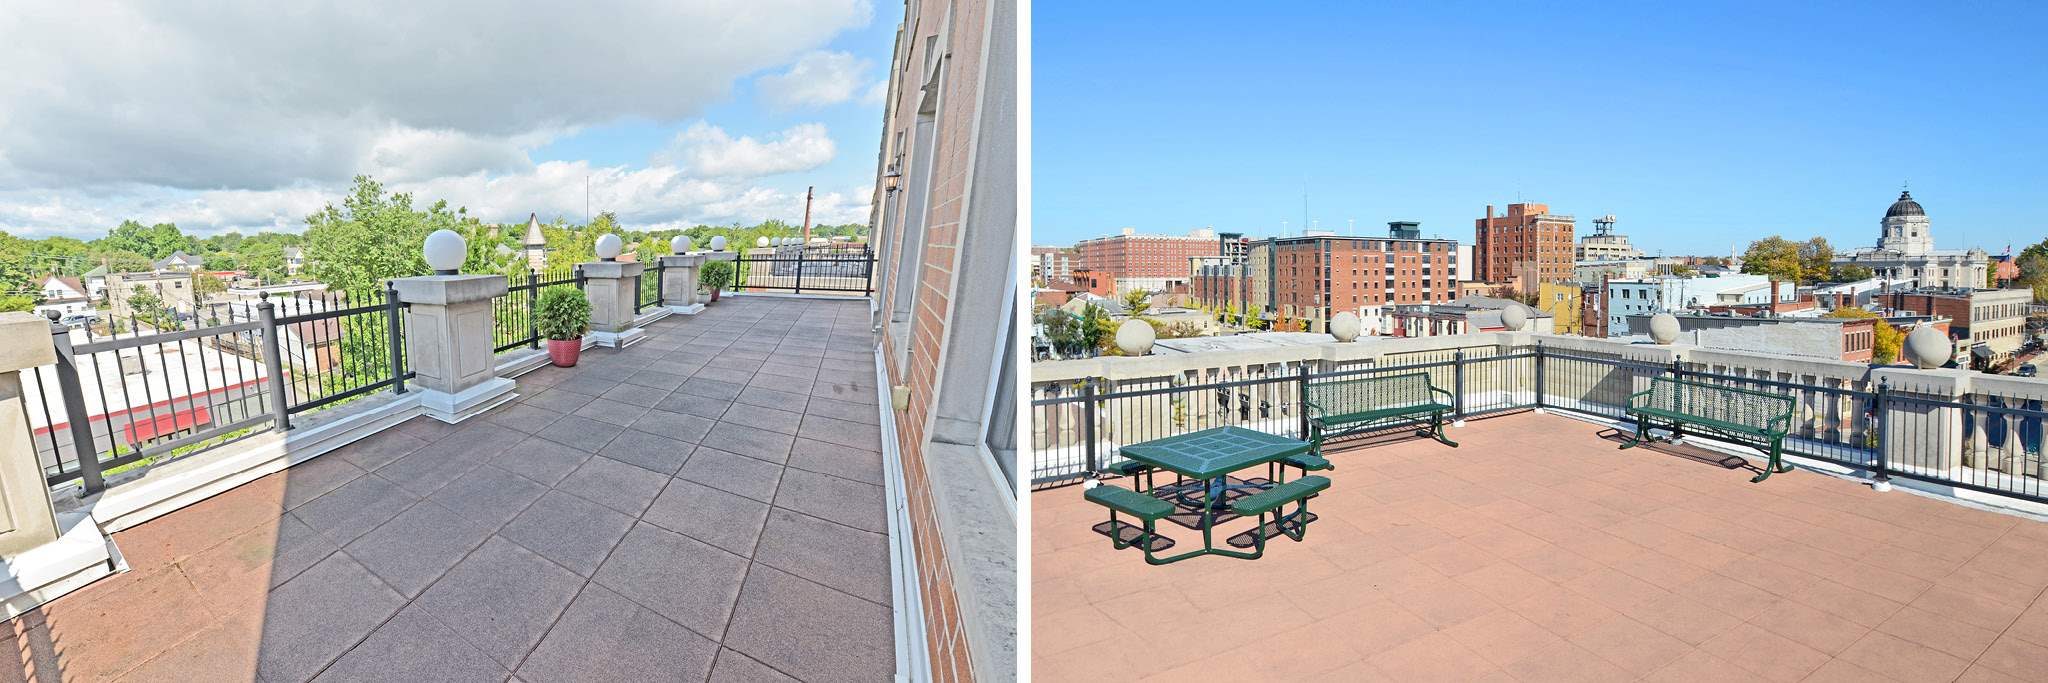 Take in the cool, crisp air by stepping onto one of the patios or balconies.